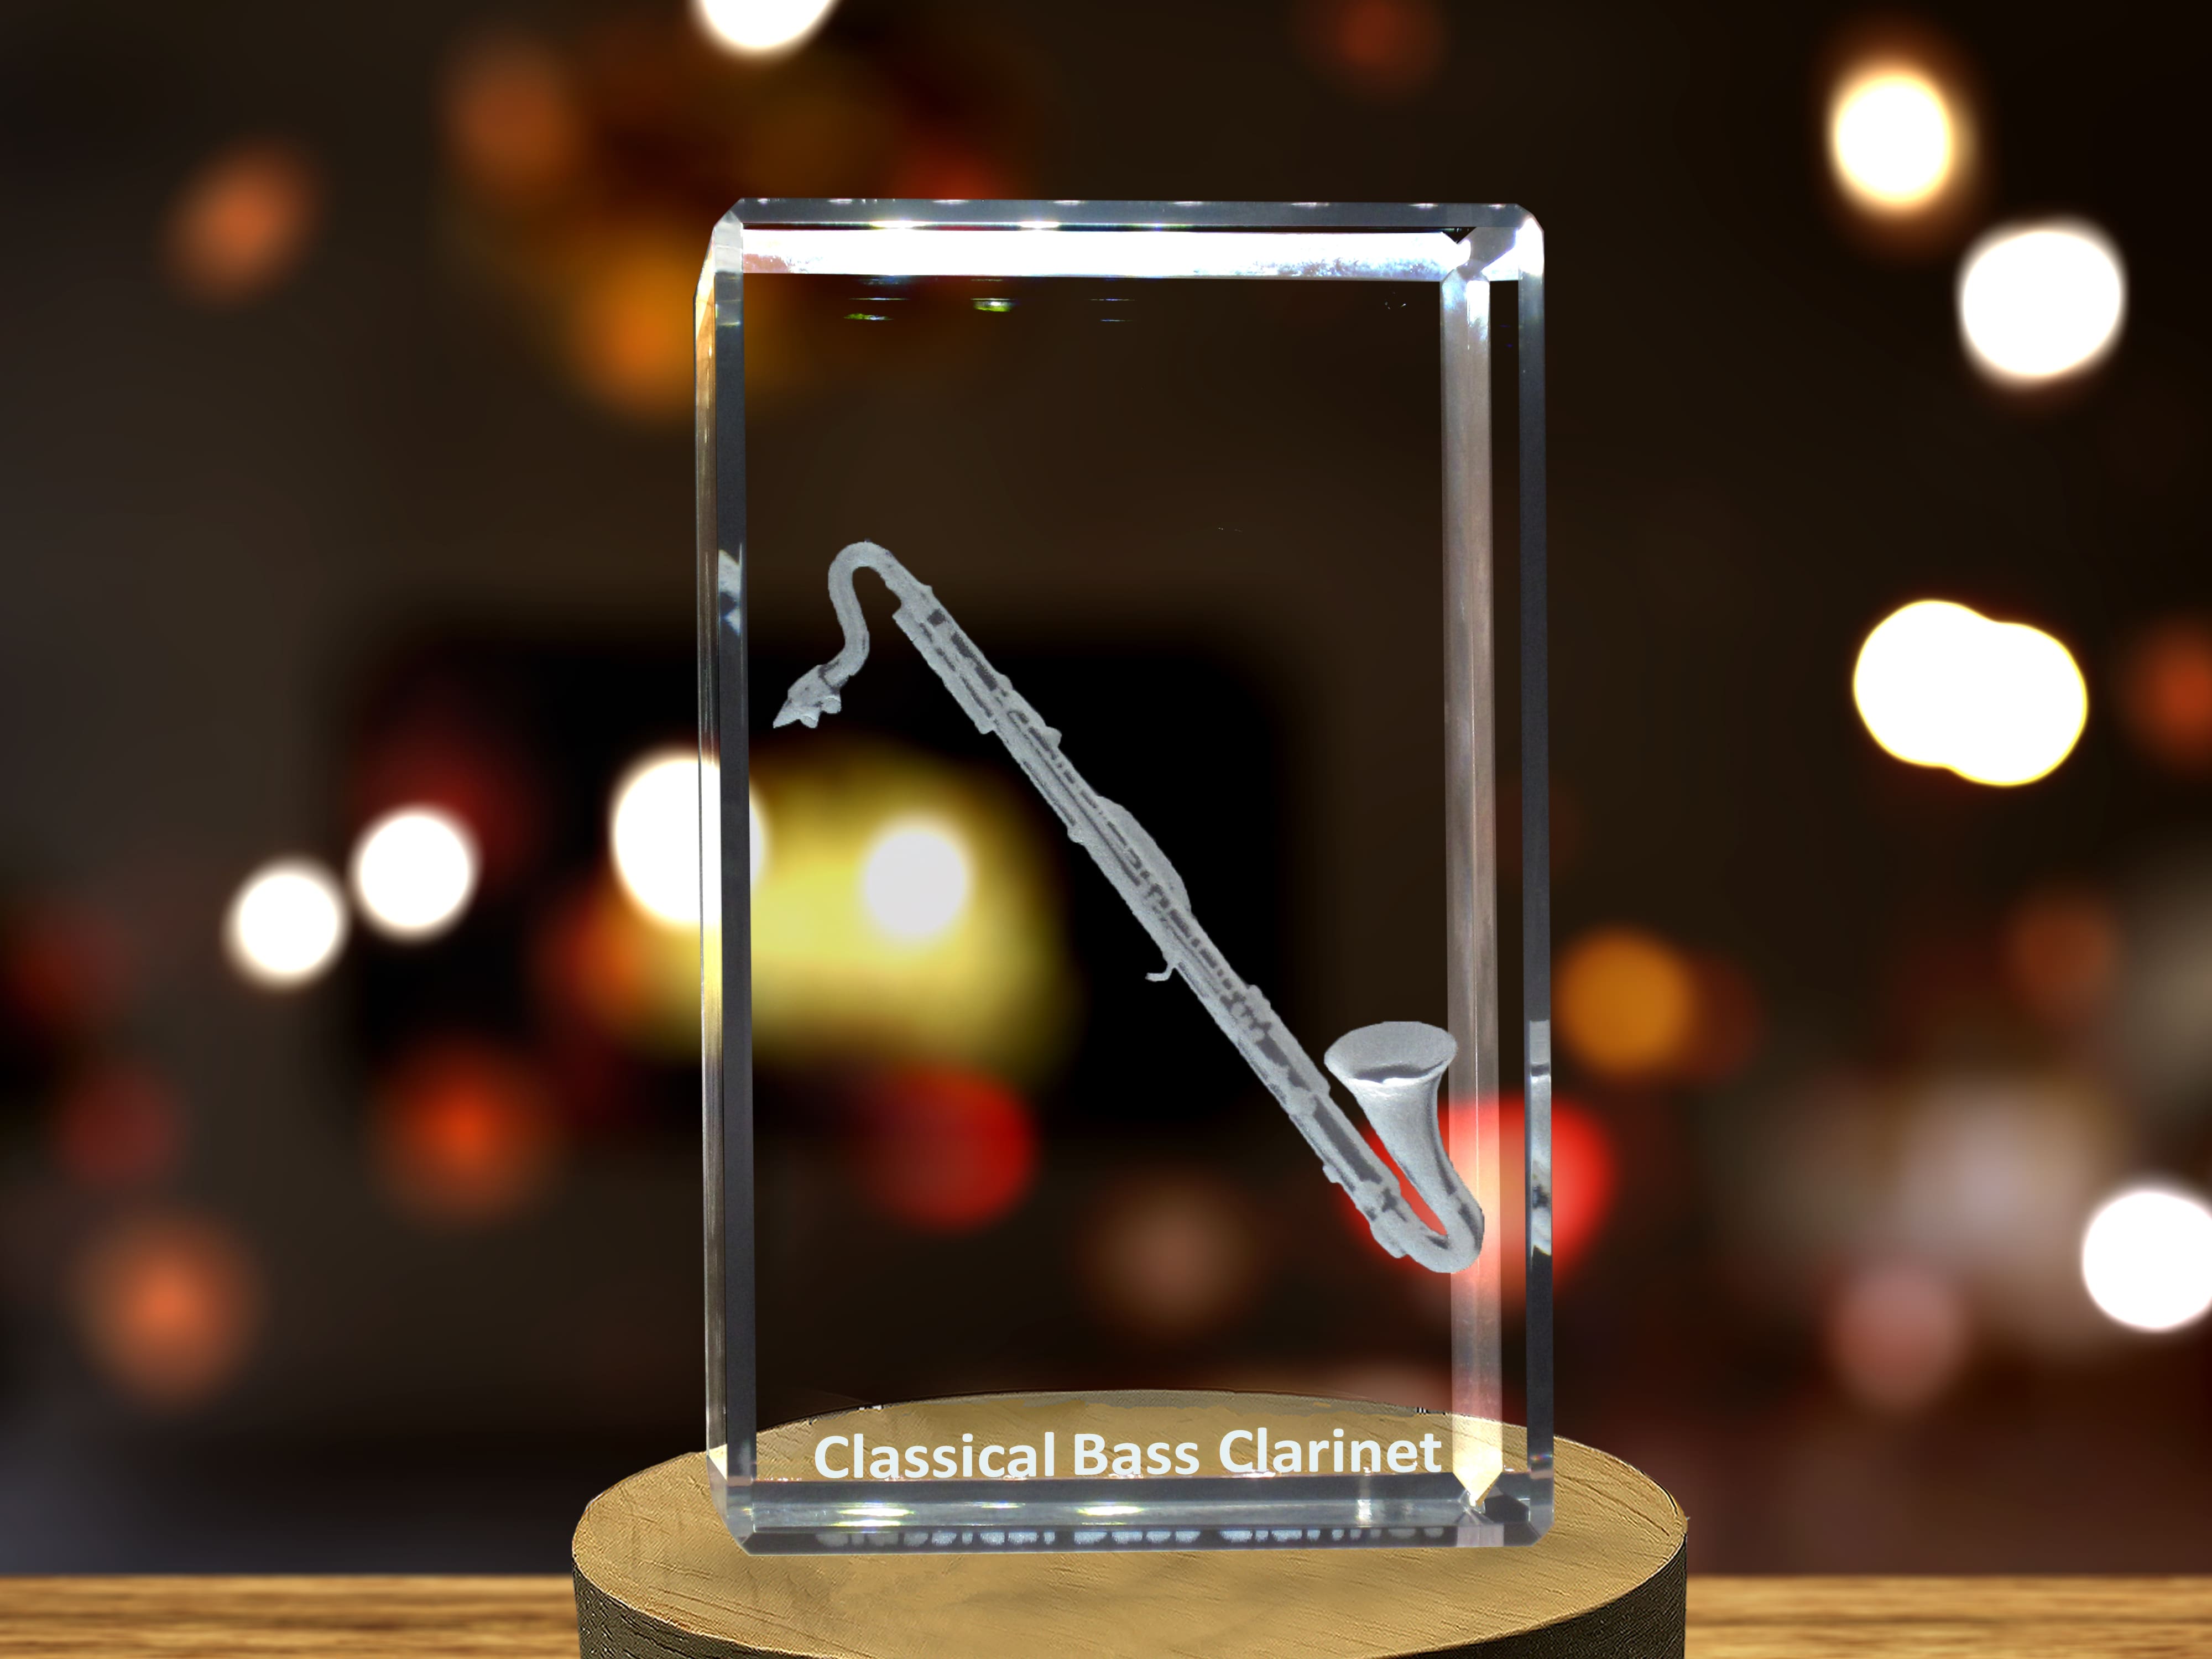 Bass Clarinet 3D Engraved Crystal | Music 3D Engraved Crystal Keepsake A&B Crystal Collection